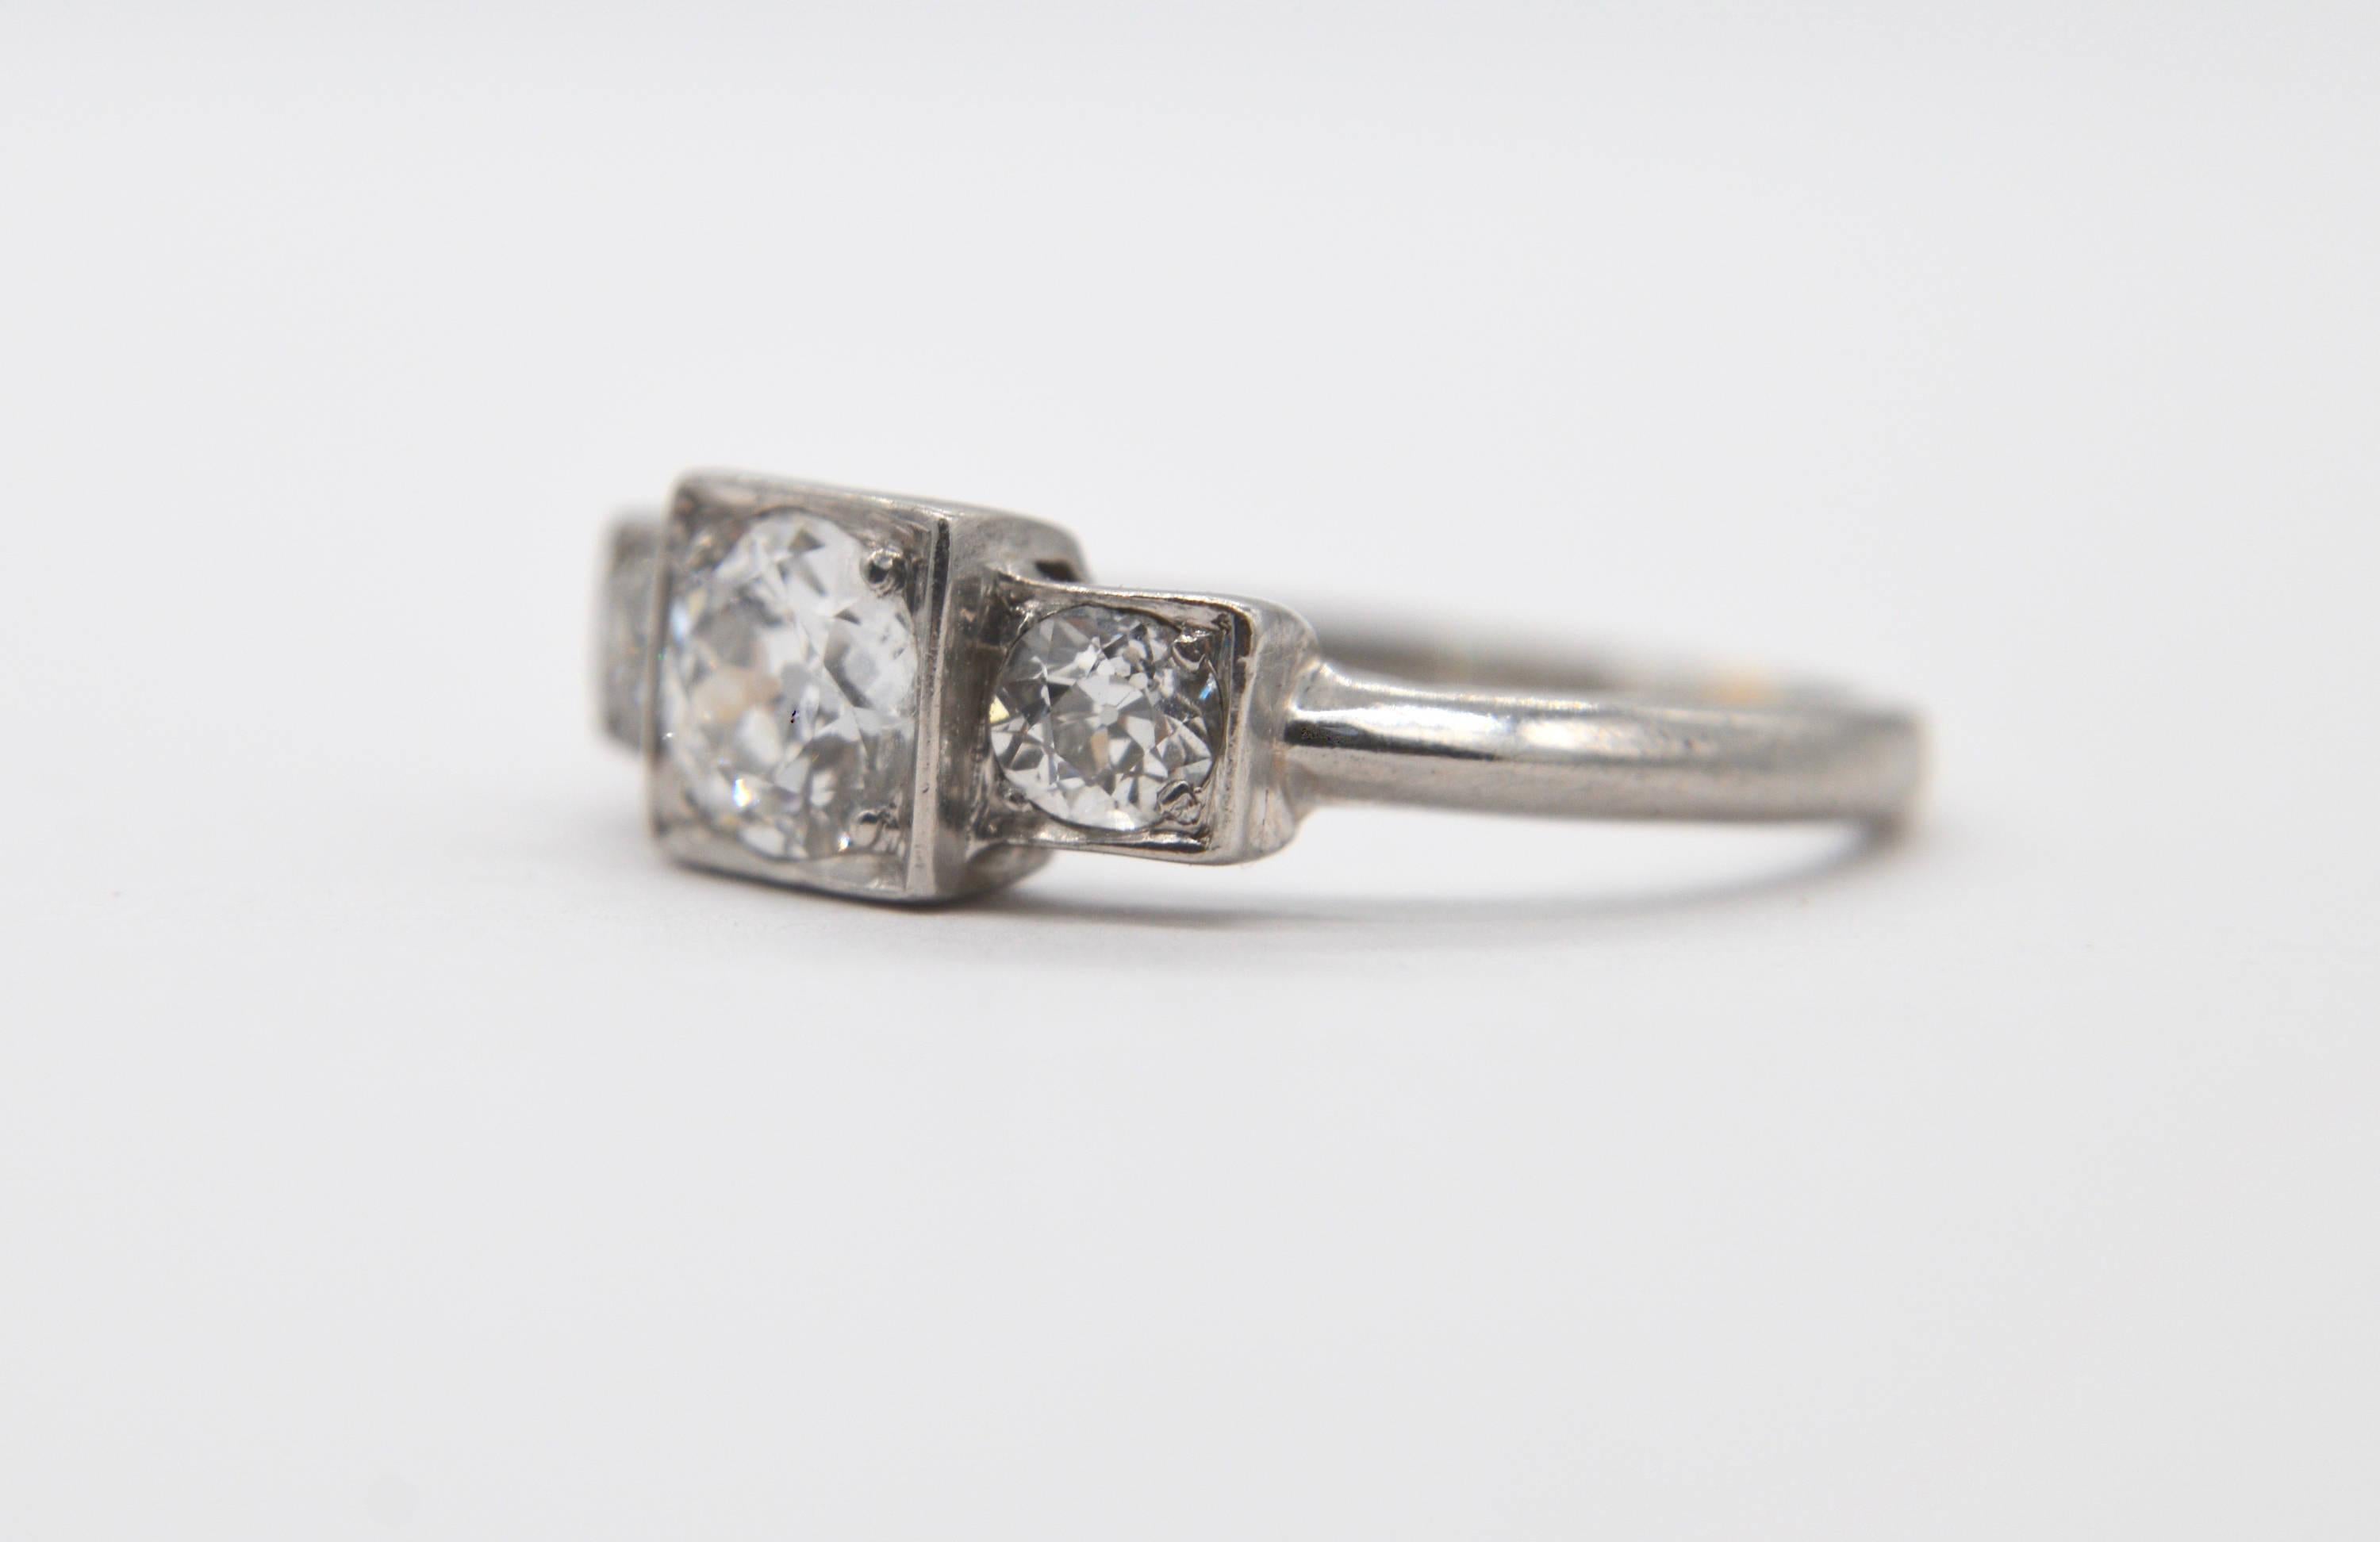 Beautiful antique Art Deco era circa 1920s .50 carat center stone, with two .11 ctw each side stones Transitional cut diamond platinum step engagement ring. Size 5.25, can be resized by a jeweler. The diamonds have been graded by a jeweler as color